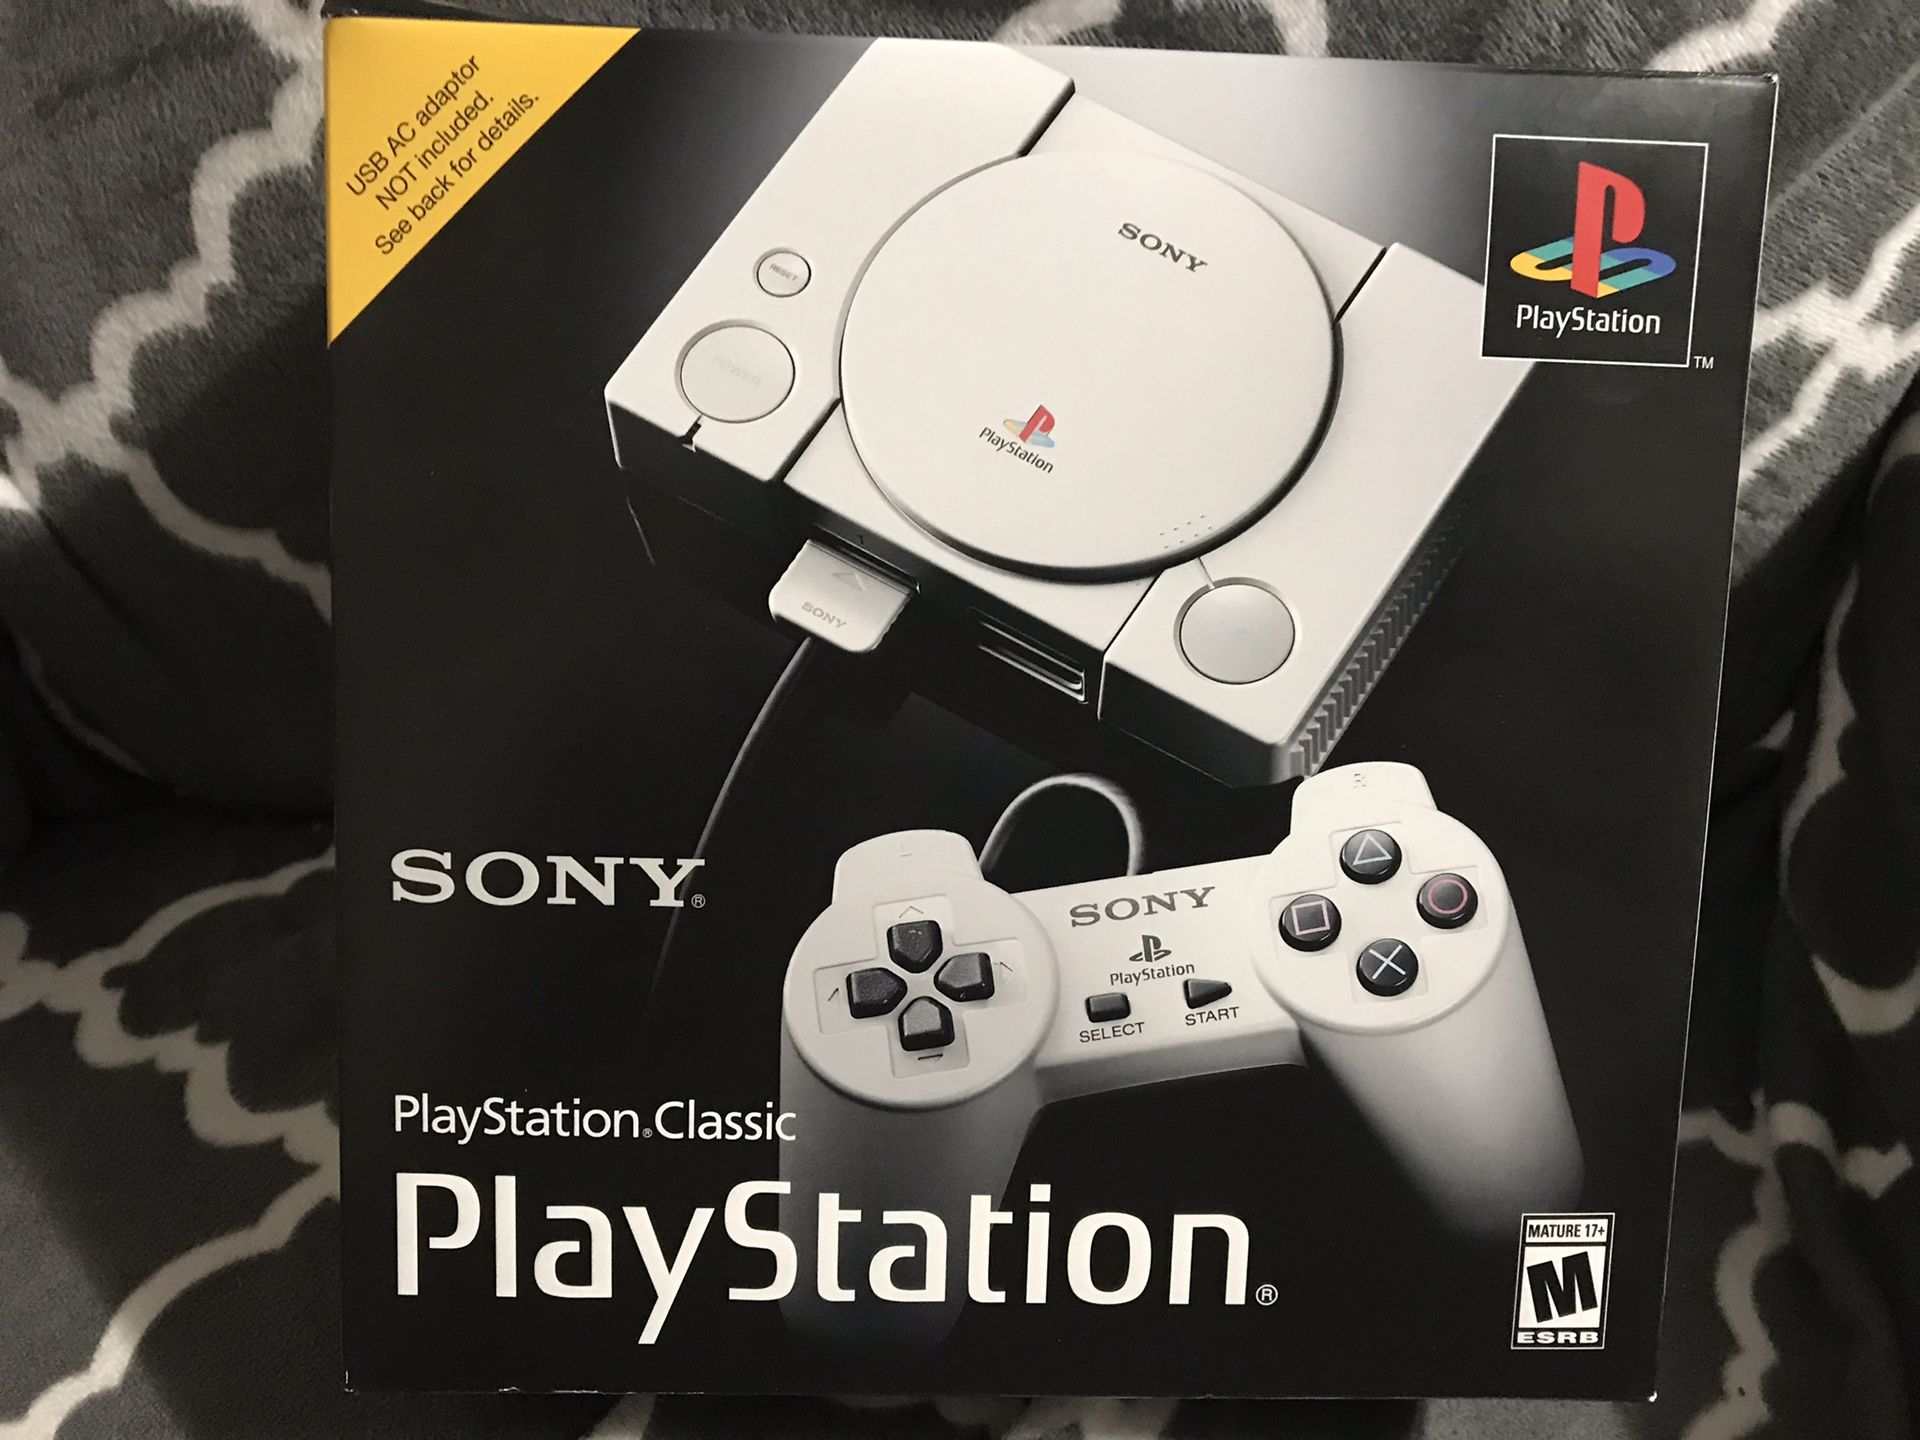 Fully modded PlayStation Classic 3500 games